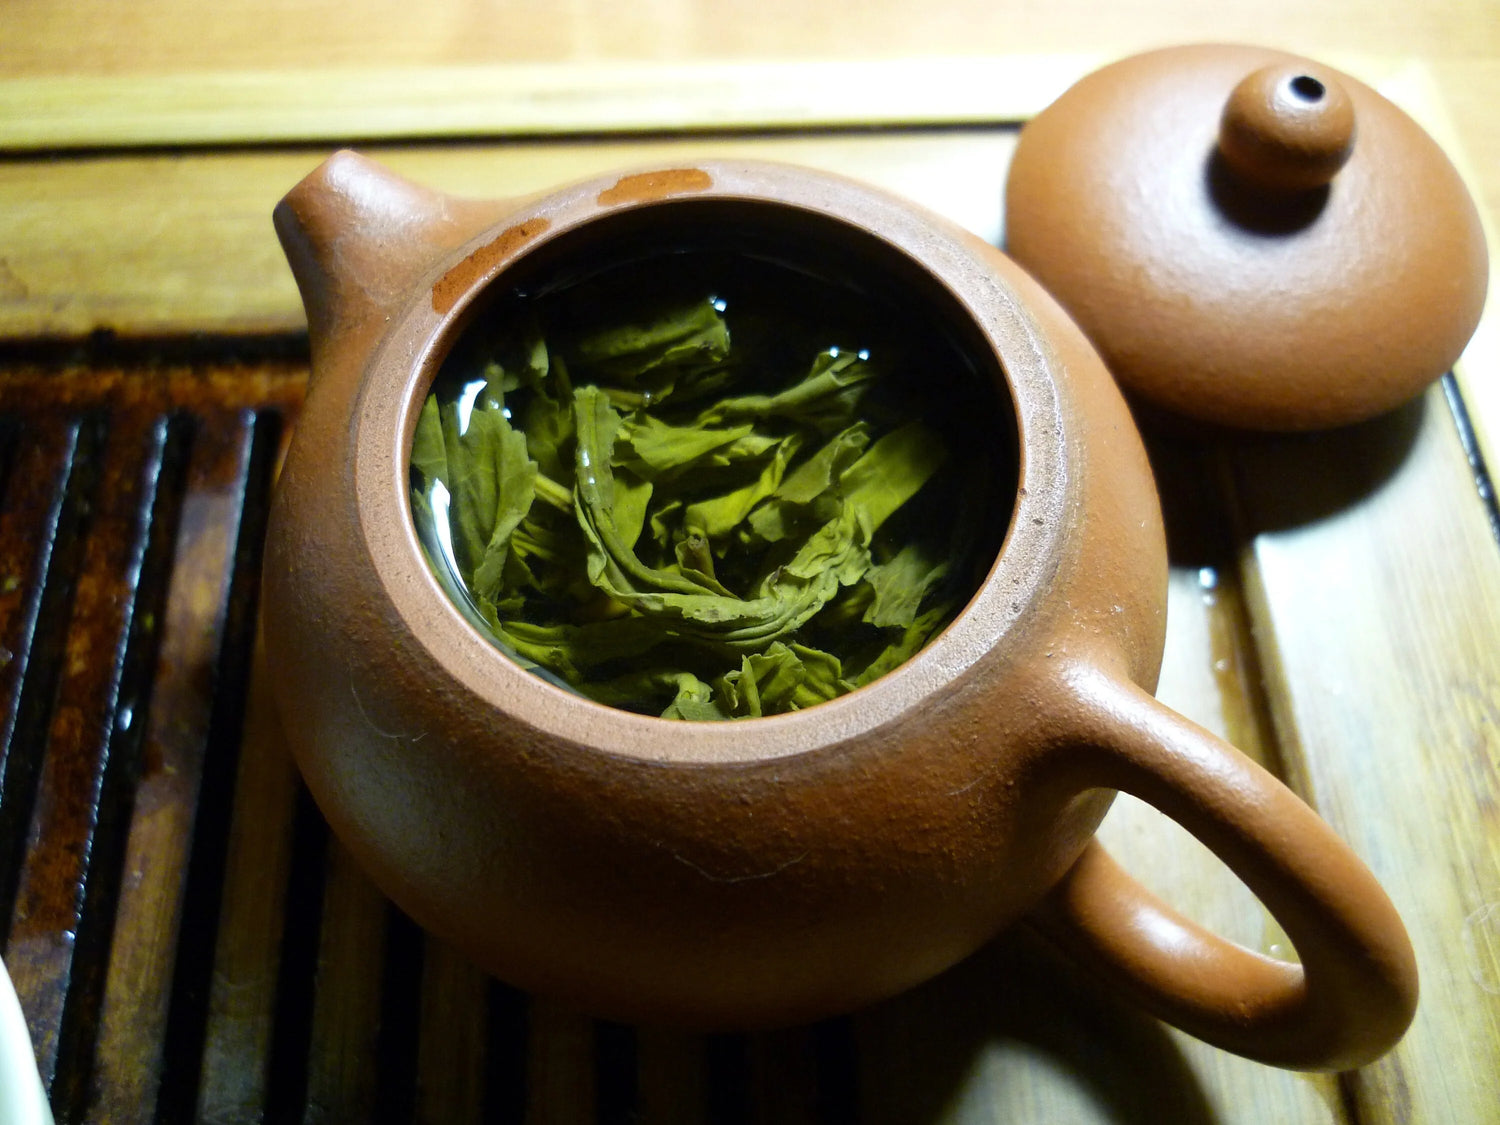 teeped loose leaf green tea in a traditional clay teapot, showcasing the vibrant green leaves of high-quality Sencha ready for a perfect brew.